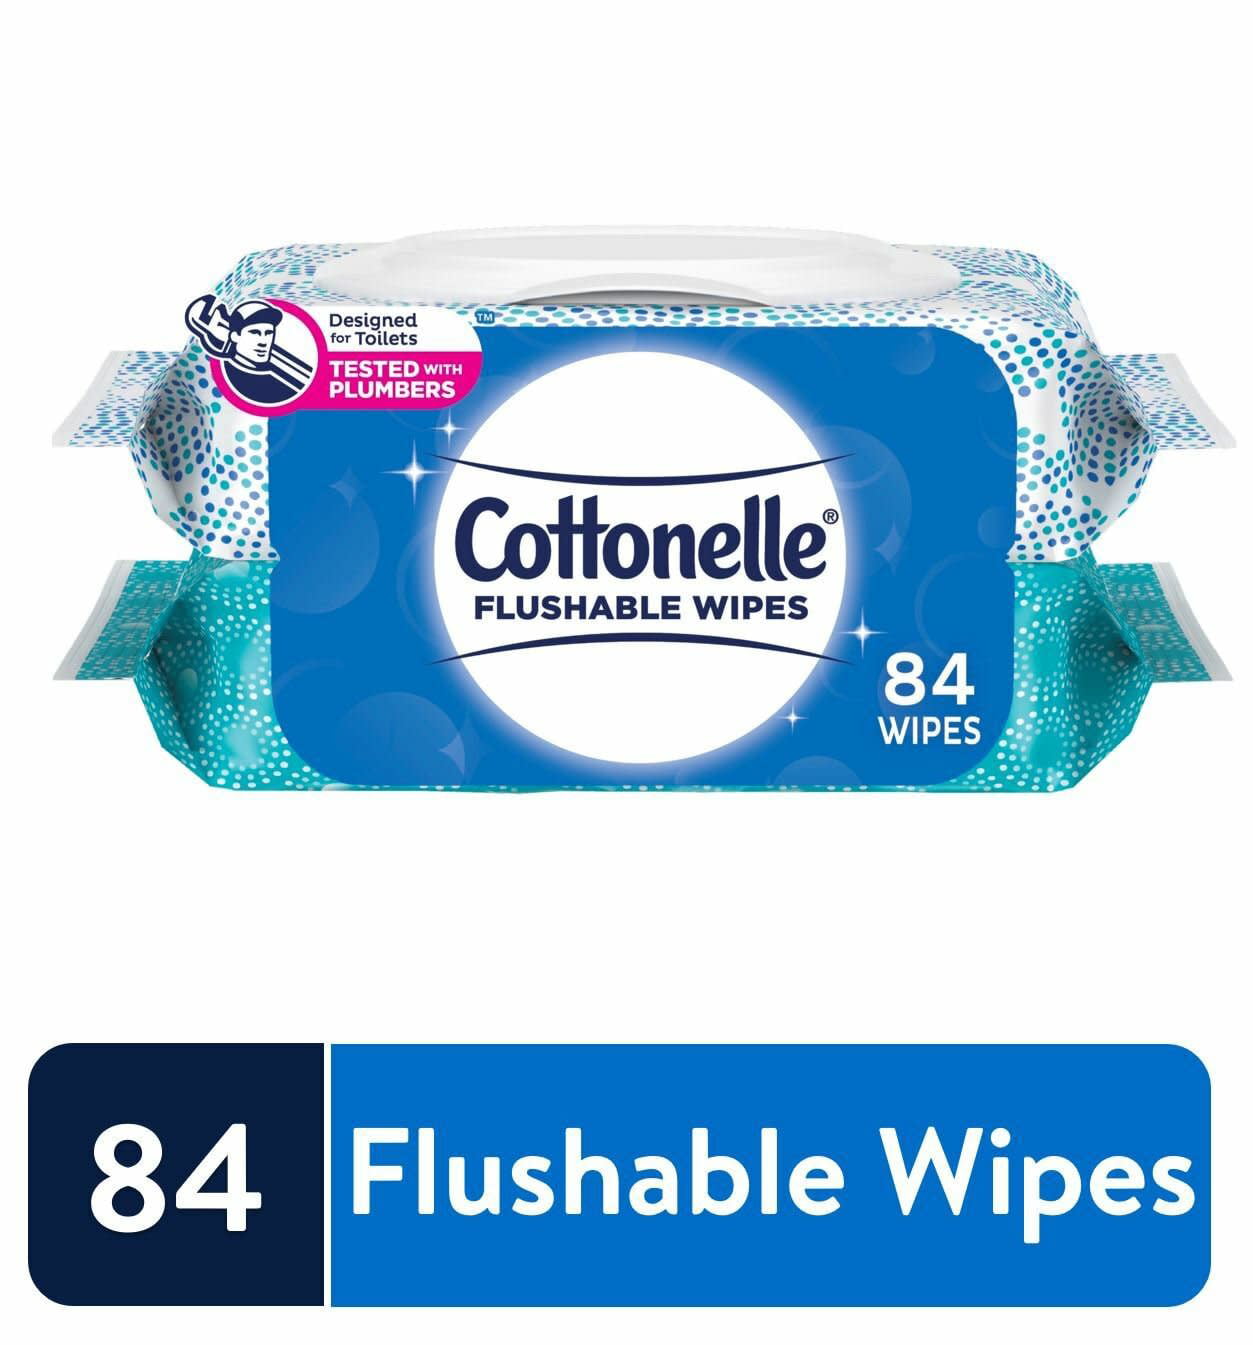 Cottonelle Flushable Wet Wipes are 100% flushable and are the only flushabl...